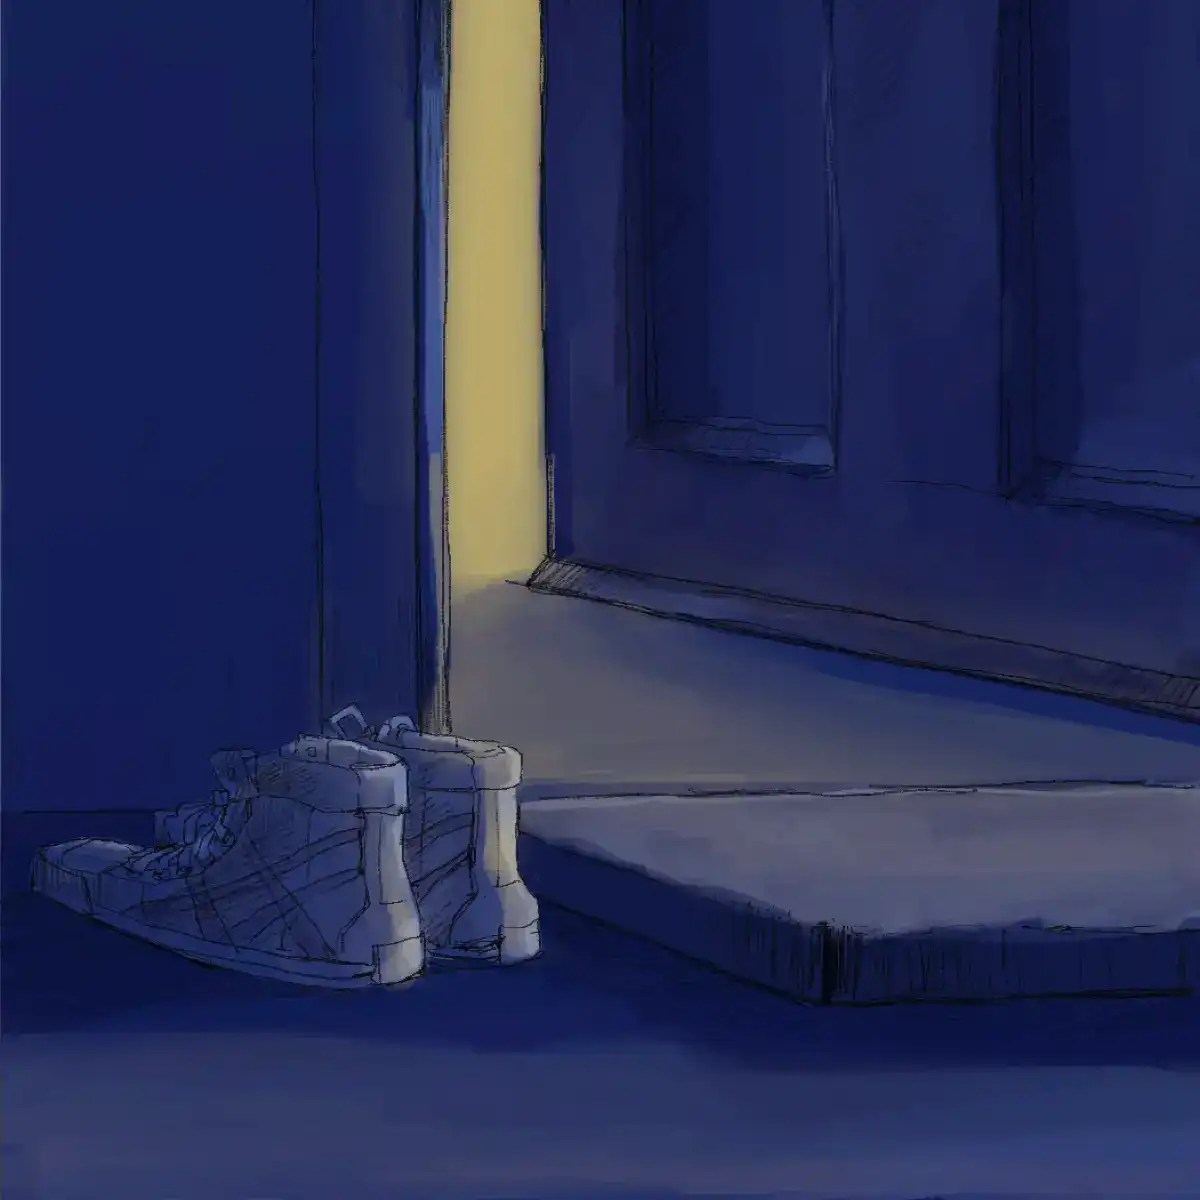 Flashback to previous night: the shoes sit outside by the door